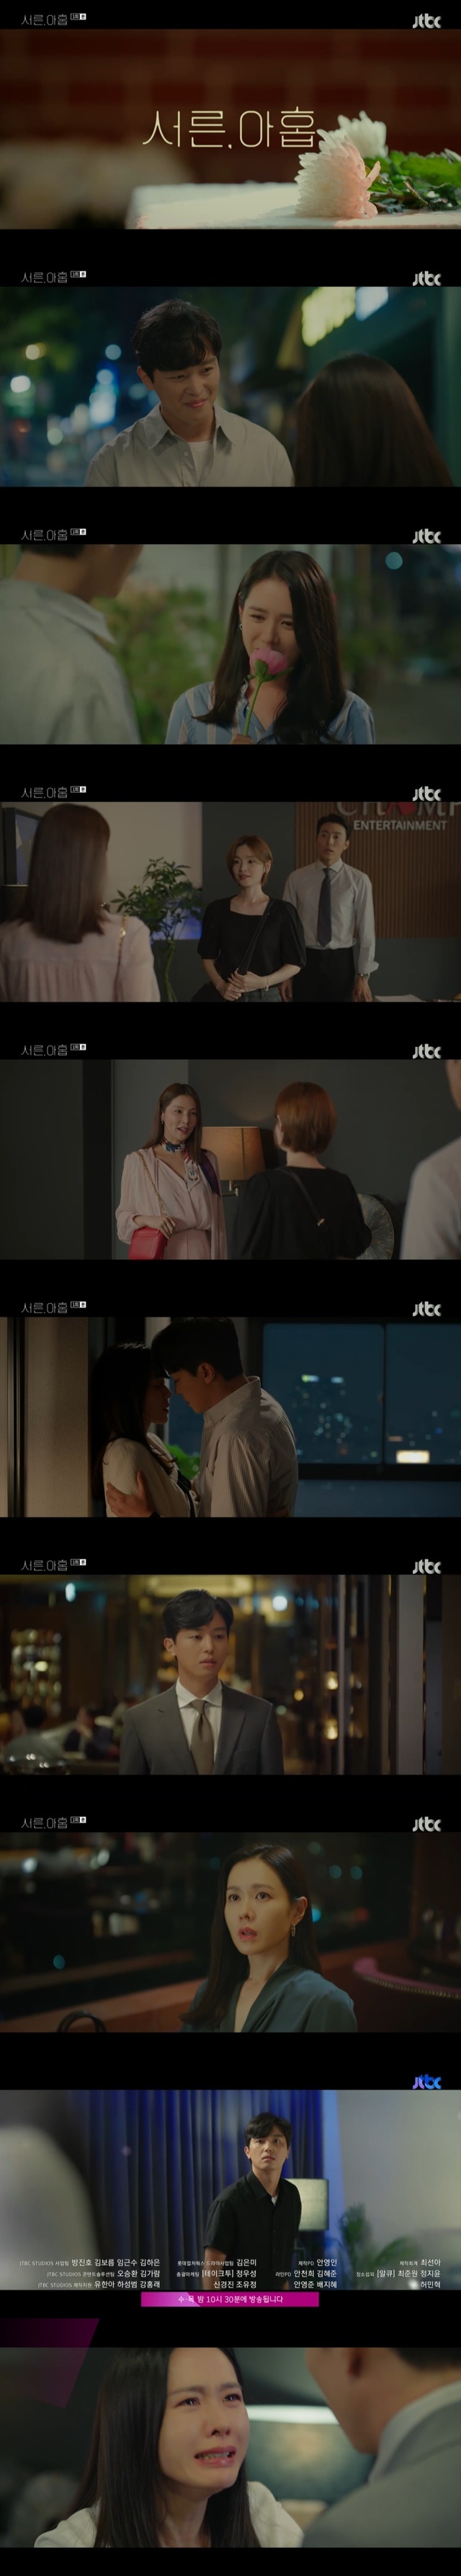 Son Ye-jin and Yeon Woo-jin began their fateful romance amid the foreshadowing of the death of one of their three friends, Son Ye-jin, Jeun Mi-do and Kim Ji Hyon.On February 16, JTBCs Drama Thirty, Nine (playplayplay by Yoo Young-ah/director Kim Sang-ho) was released on the 16th of February, and the death of one of three friends opened the drama.39-year-old Cha Mi-jo (Son Ye-jin), Jung Chan-young (Jeun Mi-do), and Zhang Xi (Kim Ji Hyon) shared massages, ate tteokbokki, and met at the age of 18 and opened the drama with an inept appearance that had lived as a best friend for 20 years.But soon, the place was changed from the appearance of three friendly friends to the funeral home, and three men, Sun-woo Kim (Yeon Woo-jin), Kim Jin-suk (This is life), and Park Hyun (Lee Tae-hwan), came to the funeral home.At the same time, Chamijo said, We met each other and learned intense love. We met our first parting for 20 years.I didnt know that any of us would have a funeral at the end of our 30s.It is the story of our fierce time when we laughed and cried a lot. He predicted the death of one of his three friends.Then, back in time, the daily lives of three friends were drawn: Chamijo, the dermatologist, was doing Wen Junhuibi, who would spend the sabbatical in the United States.Cha Mi-jos sister, Cha Mi-hyun (Kang Mal-geum), showed her brothers stupid side even though she told him that her brother Cha Mi-jo was adopted without hesitation.The first meeting of three people, Cha Mi-jo, Chung Chan-young, and Zhang Xi, was also related to adoption.The 18-year-old Chamijo first met with Contingencich Chung Chan-young on the subway to find his mother when he saw the name of a restaurant in the nursery school documents.And the real daughter of the house was Zhang Xi. Three 18-year-olds became best friends for 20 years, and together they made friendships by volunteering at the nursery school where Chamijo lived.Cha Mi-jo and Sun-woo Kim first met at the nursery.Sun-woo Kim had a second meeting with Chamijo delivering the wrist clock that Chamijo left behind, and Chamijo returned the peony flower with a drunken state.The third meeting between the two is a classical concert.Sun-woo Kim was surprised by the sudden development of the promise and when he met Contingencich Chamijo after watching the performance alone, he said, Do you want to go to see the potion? Chamijo admitted to being attracted to Sun-woo Kims house while being embarrassed by the sudden development.The two made love at Sun-woo Kims house, but Cha Mi-jo rejected Sun-woo Kims proposal to meet again.Chung Chan-young had a long-time love Kim Jin-suk, who came to Chamijos alumni association brother to return the CD to Chamijo, but at first sight he was struck by Chung Chan-young.Kim Jin-suk, however, broke up with Chung Chan-young due to studying abroad, and Kang Sun-ju (Song Min-ji) became pregnant and marriage.Nevertheless, the love of Kim Jin-suk and Chung Chan-young, who returned from studying abroad, was not over, and Cha Mi-jo repeatedly recommended a farewell to his friend Chung Chan-young, saying, Affair.A new connection was also implied to Zhang Xi.Zhang Xi glanced at the new restaurant in the neighborhood, Wen Junhui, and ran away with his eyes meeting with Park Hyun (Lee Tae-hwan).Wen Junhui, a former hotel chef, was an acquaintance of Sun-woo Kim, and the identity of the dermatologist Kim Jin-suk introduced to Chamijo at the end of the broadcast was revealed as Sun-woo Kim, revealing that the three men also had a relationship.Chamijo was surprised at the reunion with Sun-woo Kim when he went to see a doctor to take charge of the hospital while he was having a sabbatical. At the same time, Chung Chan-young decided to end his long love by saying farewell to Kim Jin-suk as promised to Chamijo.